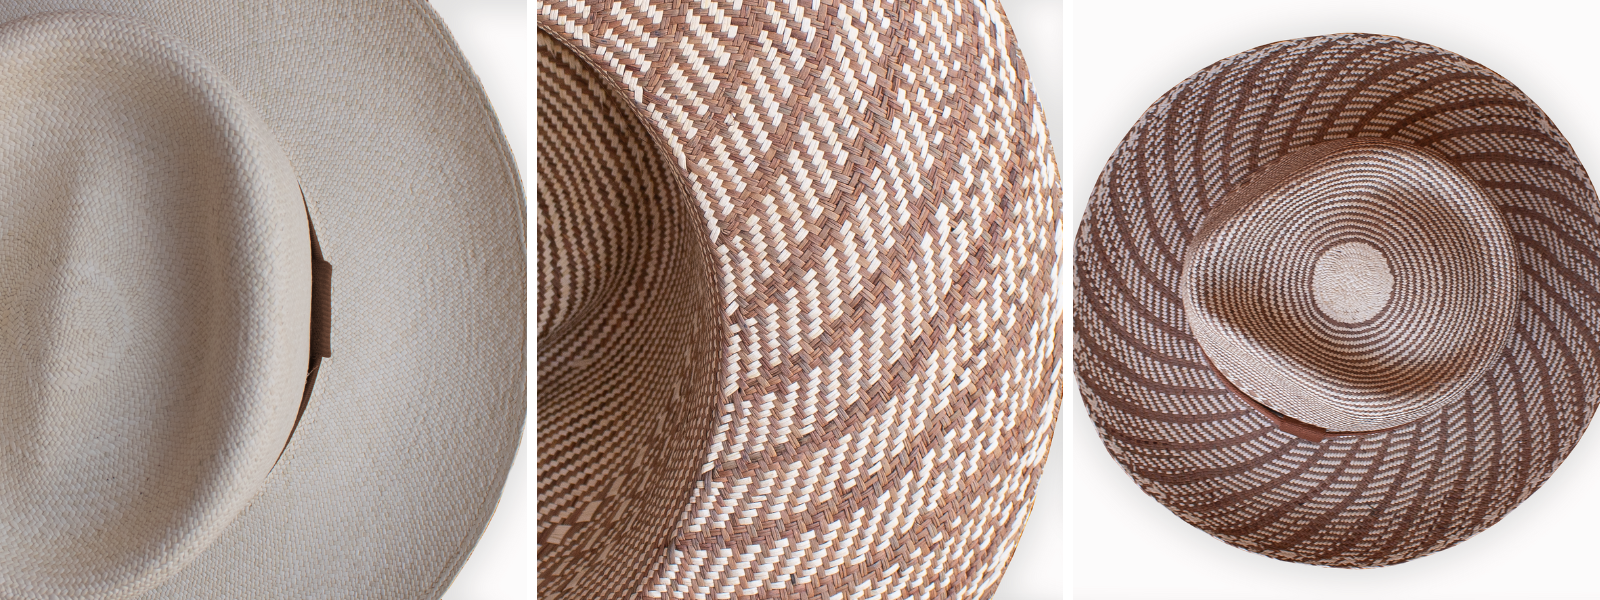 anatomy of a mexican panama hat